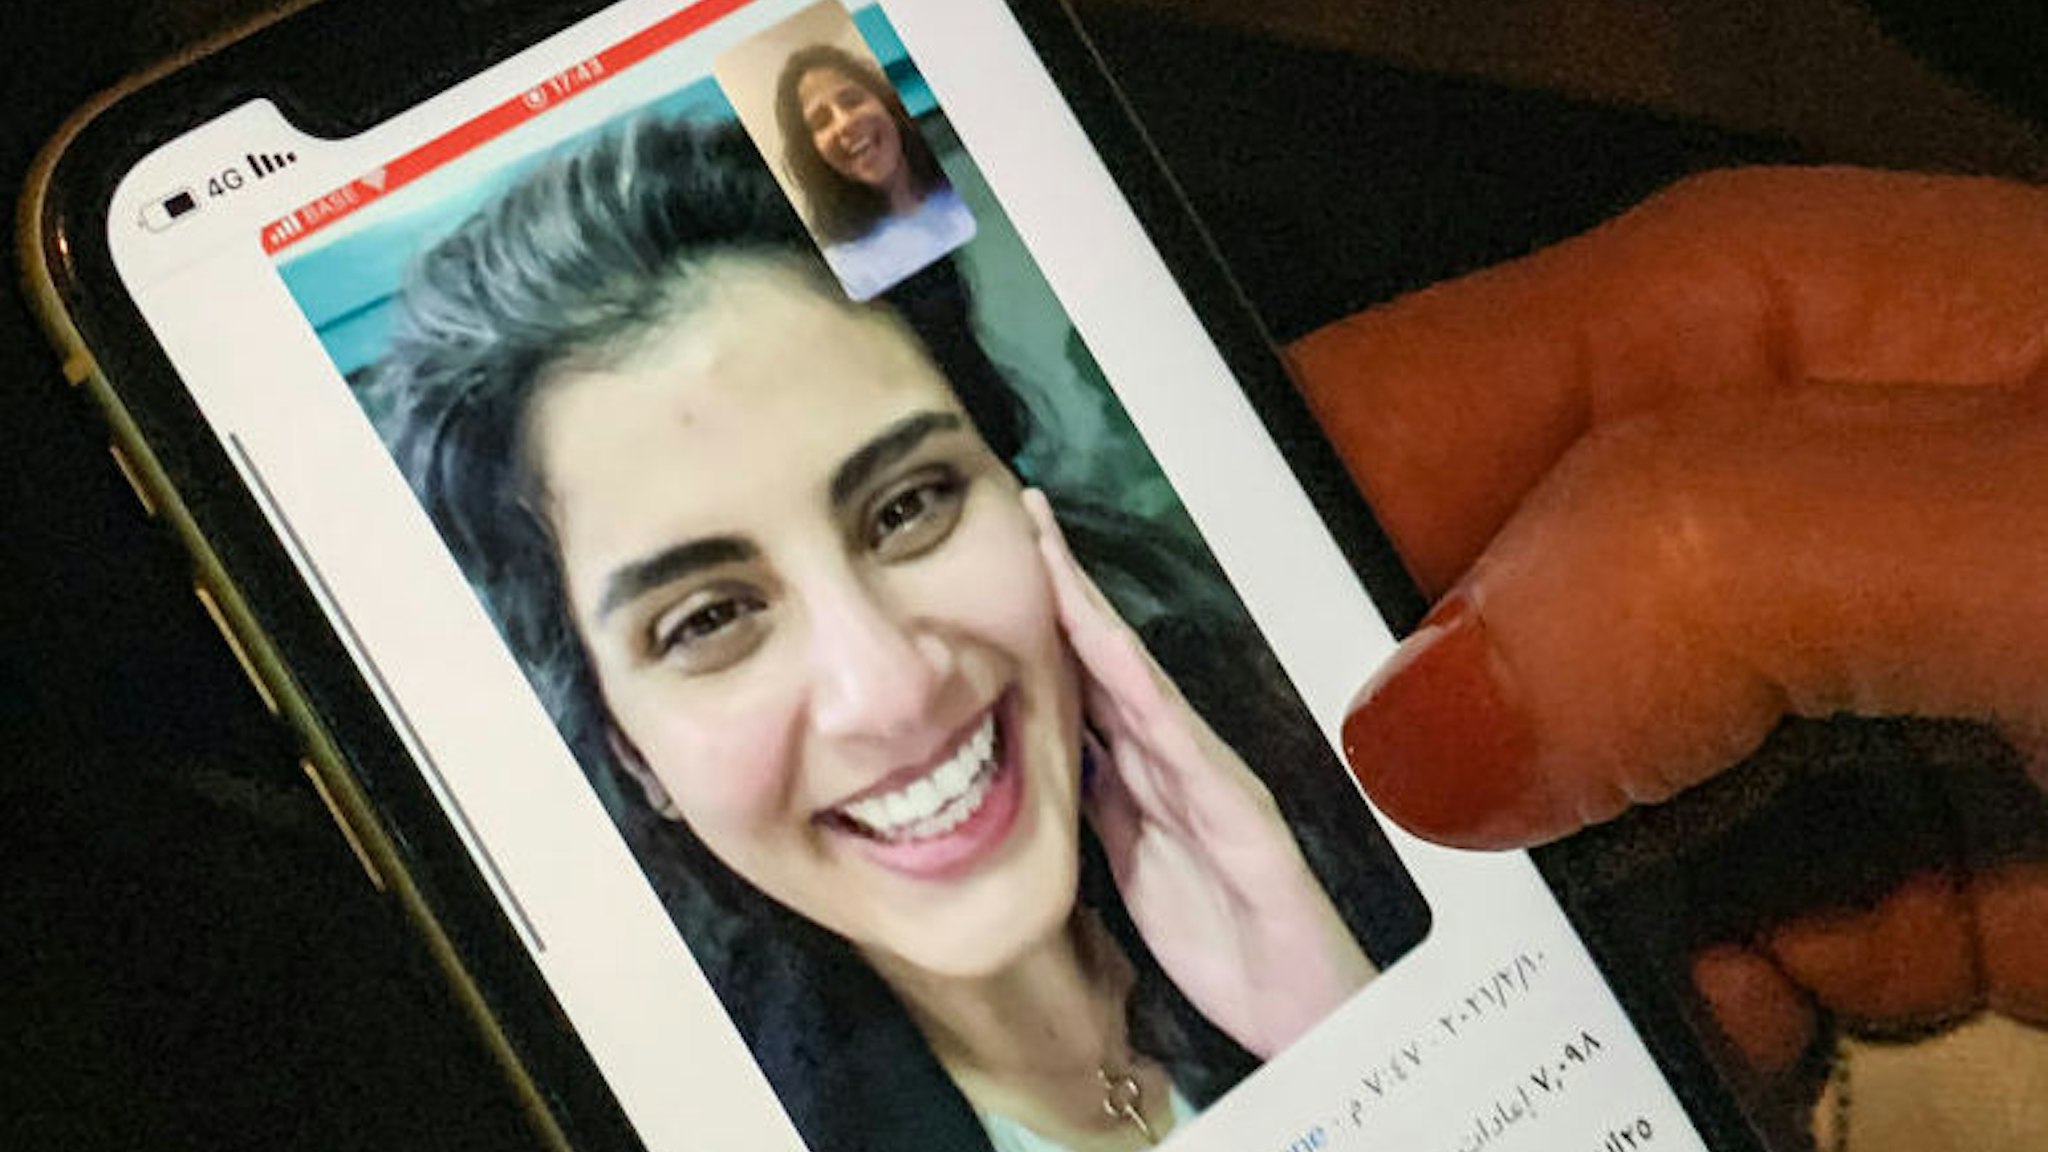 This picture taken February 10, 2021 in Saudi Arabia's capital Riyadh shows a woman viewing a tweet posted by the sister of Saudi activist Loujain al-Hathloul, Lina, showing a screenshot of them having a video call following Hathloul's release after nearly three years in detention. - Saudi authorities on February 10 released the prominent women's rights activist, her family said, as the kingdom comes under renewed US pressure over its human rights record. Hathloul, 31, was arrested in May 2018 with about a dozen other women activists just weeks before the historic lifting of a decades-long ban on female drivers, a reform they had long campaigned for, sparking a torrent of international criticism. (Photo by Fayez Nureldine / AFP) (Photo by FAYEZ NURELDINE/AFP via Getty Images)